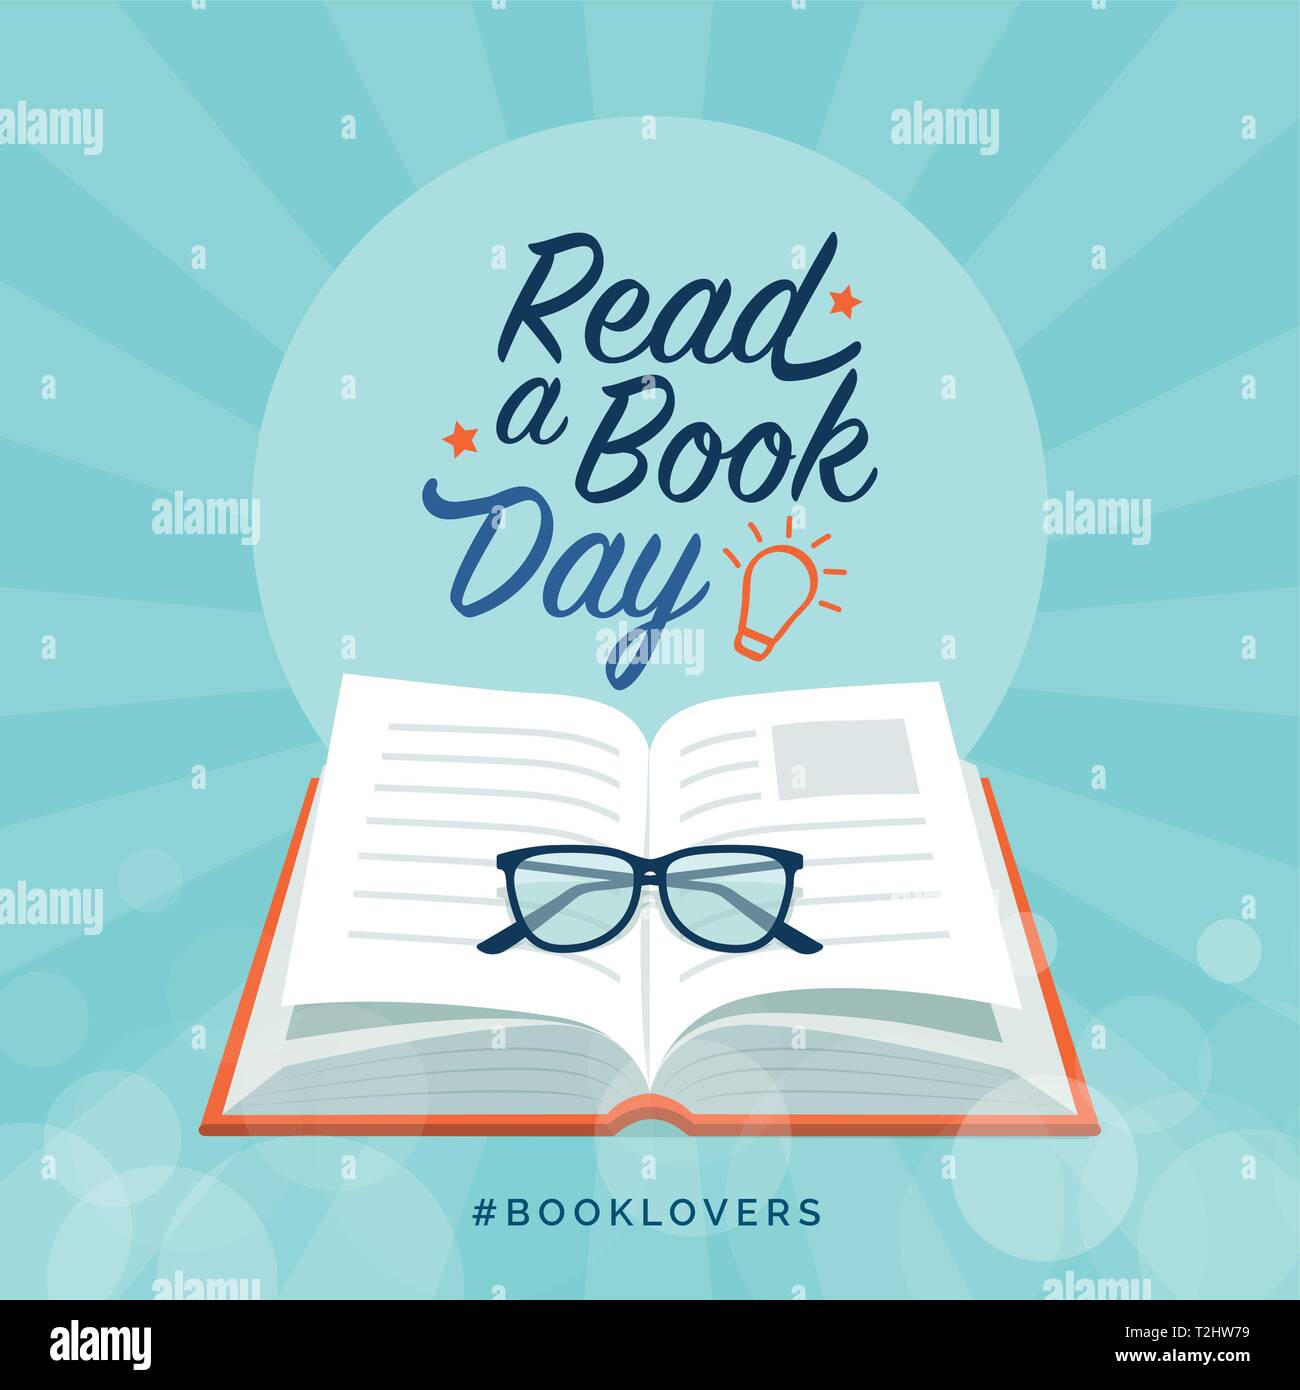 Read a book day social media post and card design with open book and glasses Stock Vector